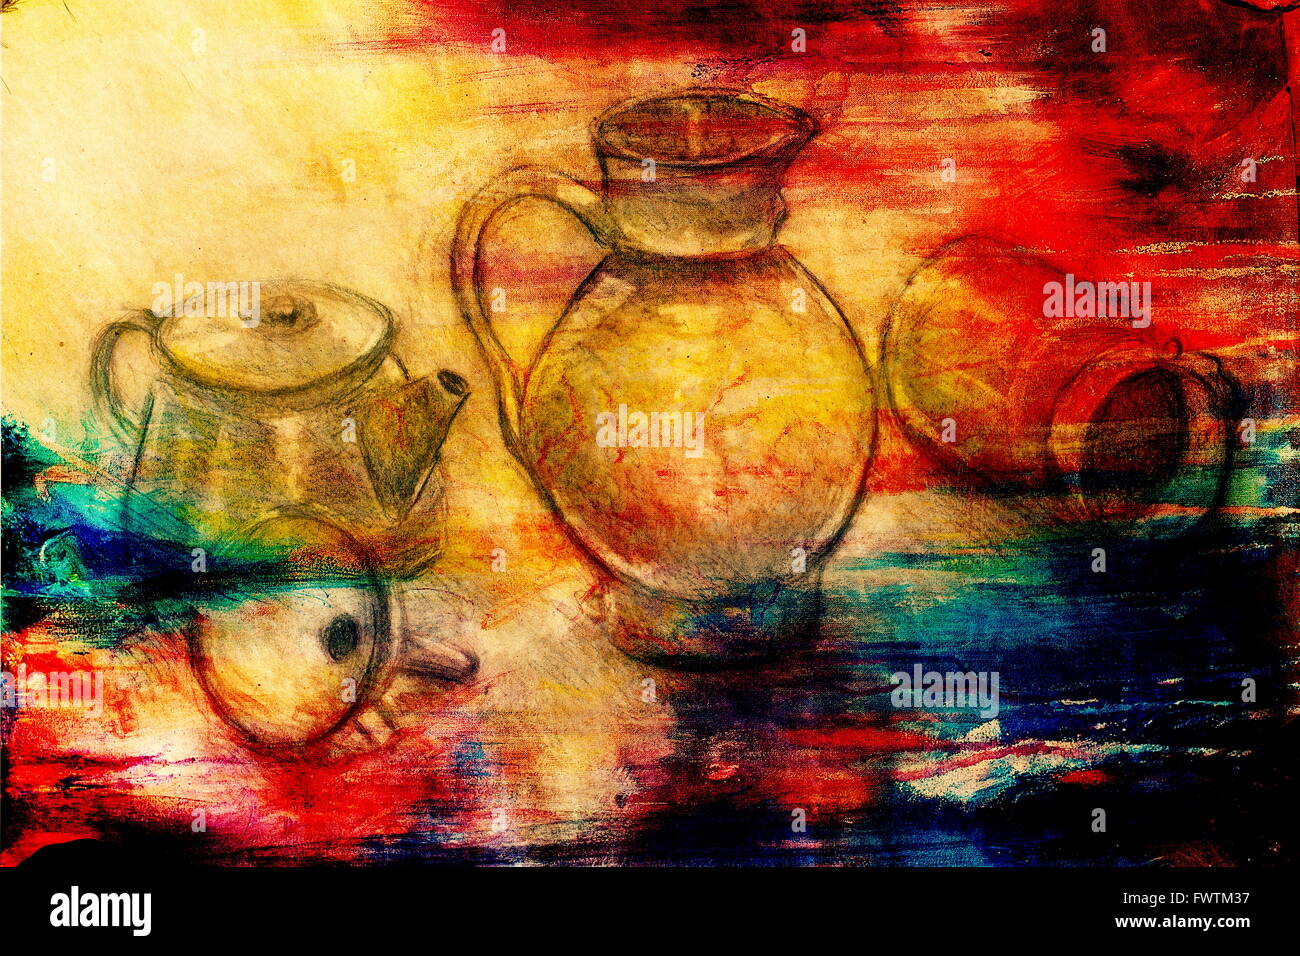 still life drawing. Original hand draw on paper. Teapot, jug, funnel and cans. Stock Photo